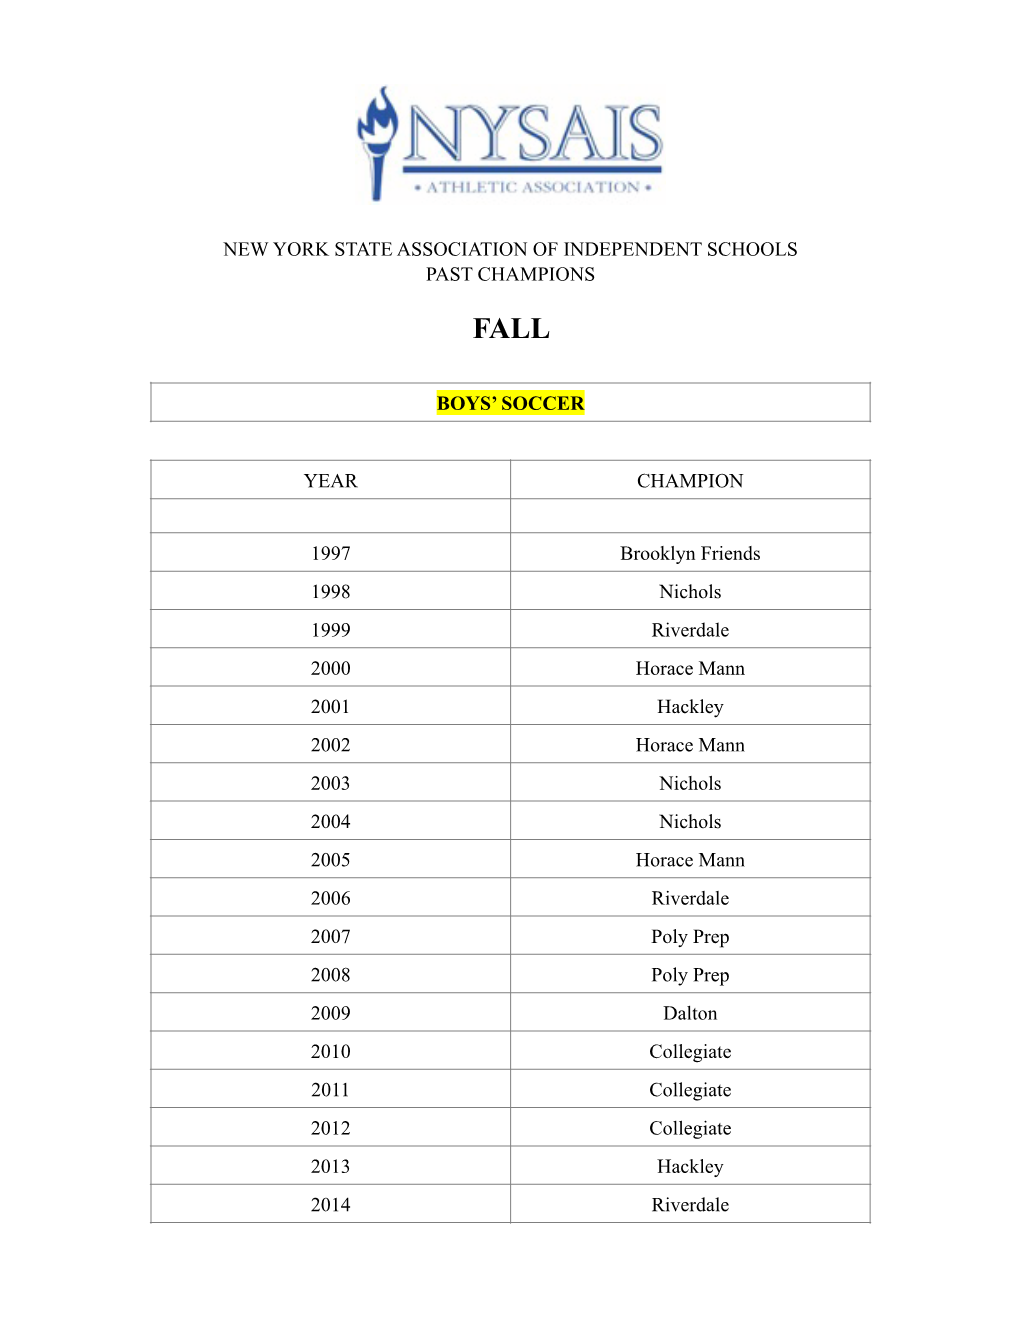 New York State Association of Independent Schools Past Champions Fall